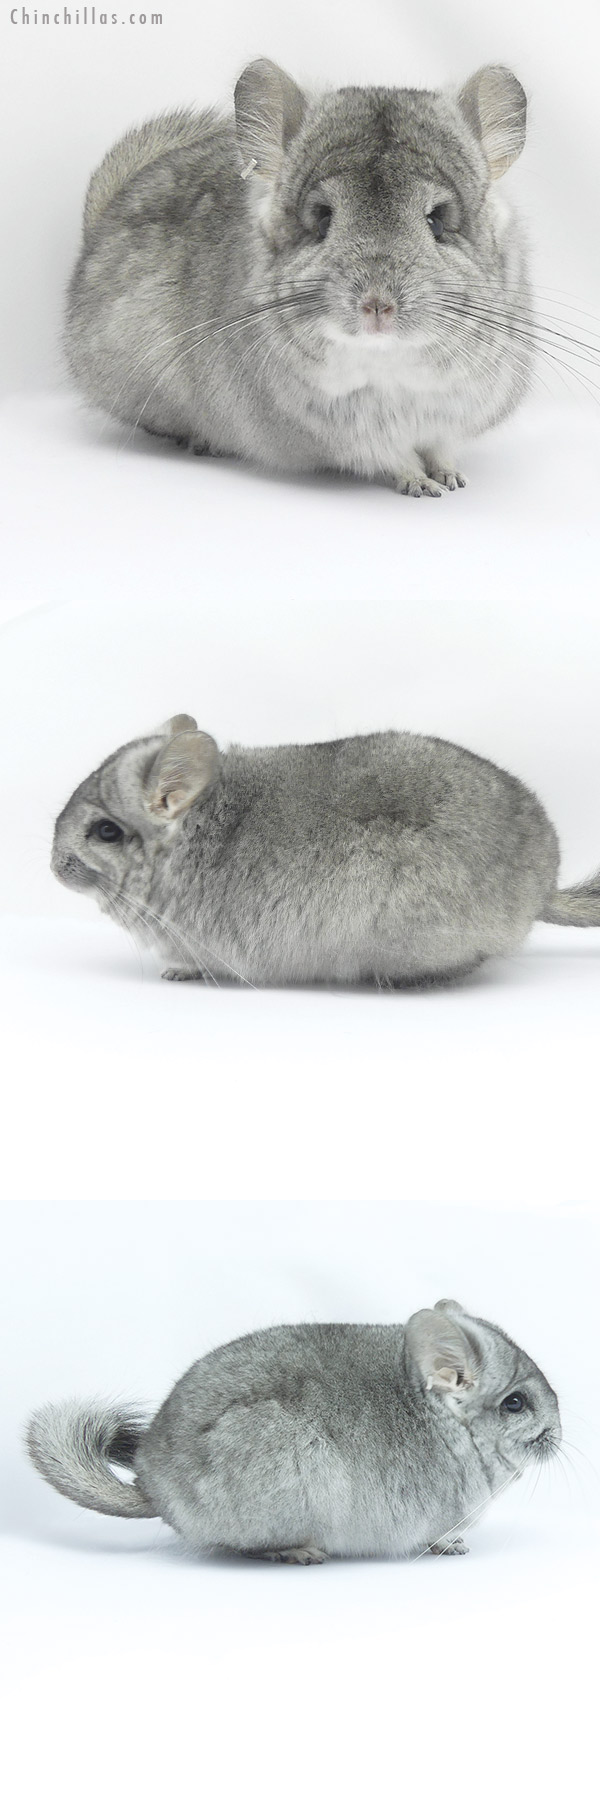 Chinchilla or related item offered for sale or export on Chinchillas.com - 19414 Blocky Mini Standard ( Violet Carrier )  Royal Persian Angora Female Chinchilla